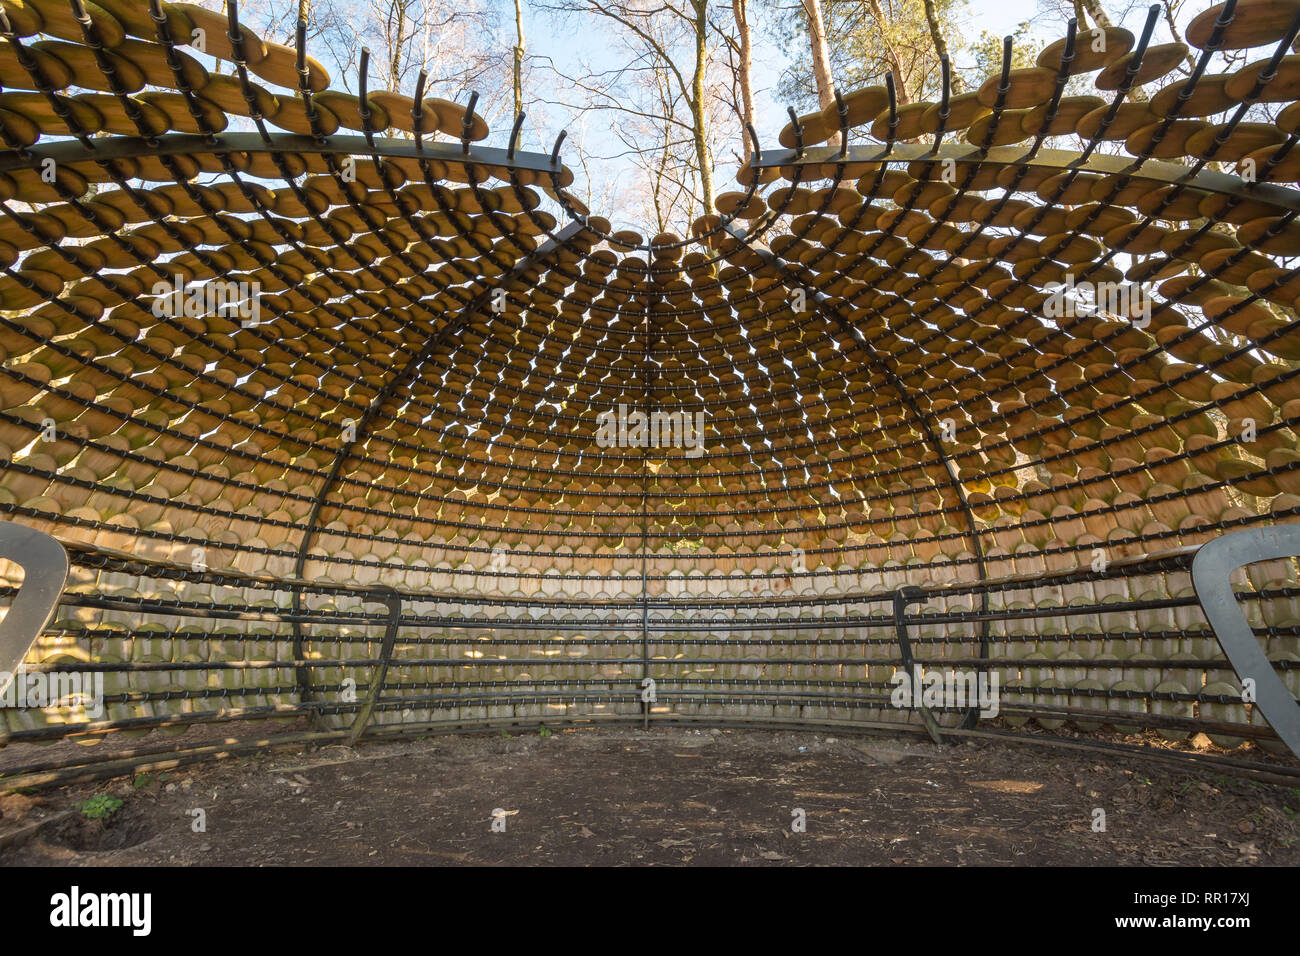 Art installation called Perspectives by Giles Miller in The Hurtwood in the Surrey Hills Area of Outstanding Natural Beauty, UK. Seated pavilion. Stock Photo